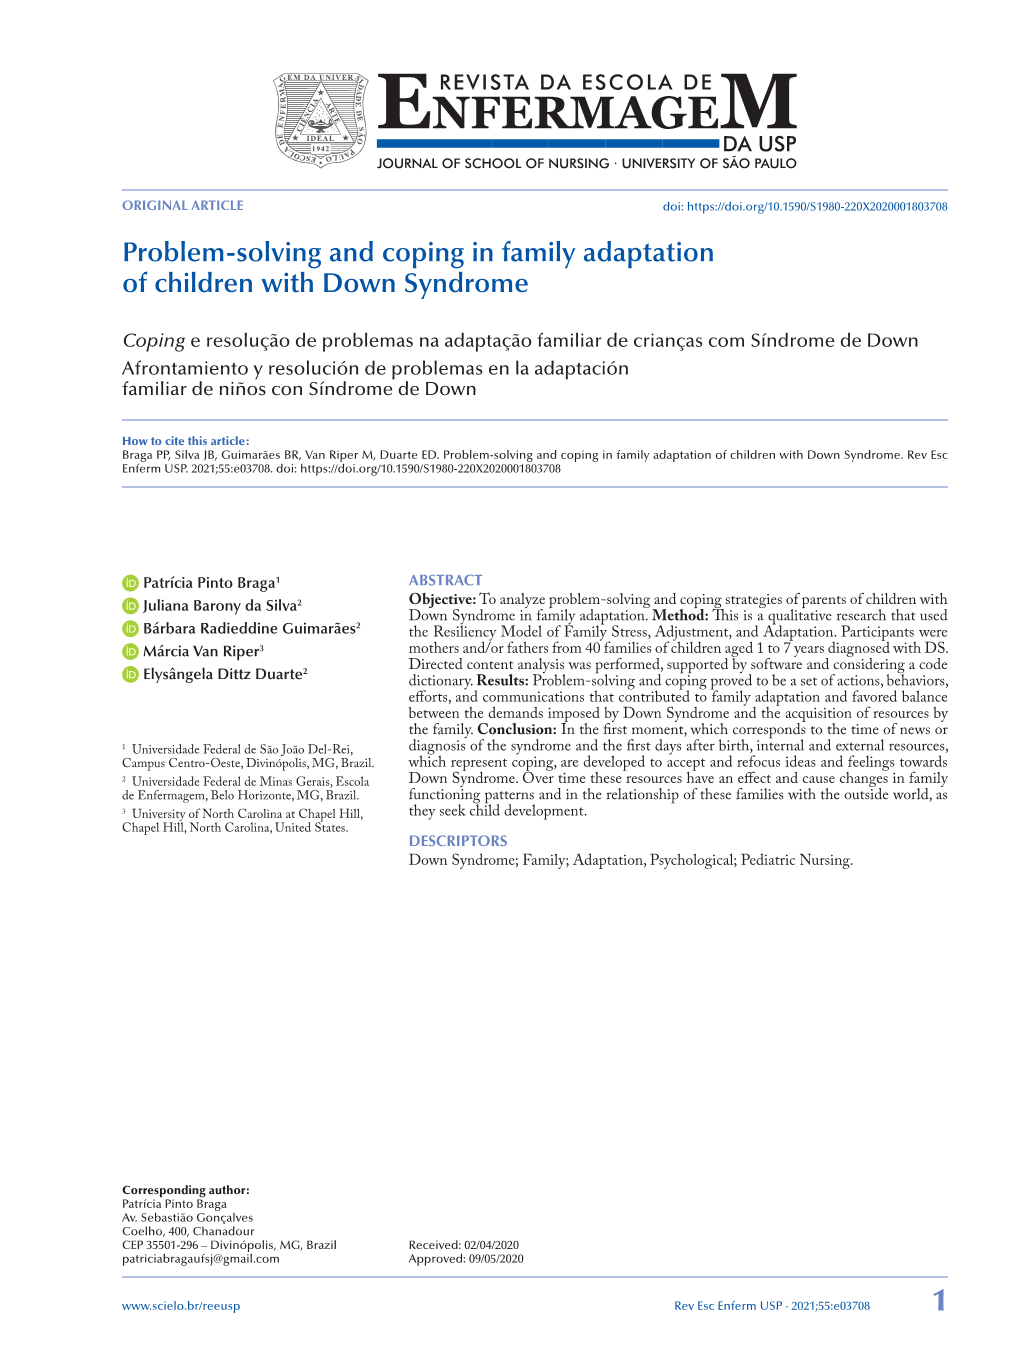 Problem-Solving and Coping in Family Adaptation of Children with Down Syndrome